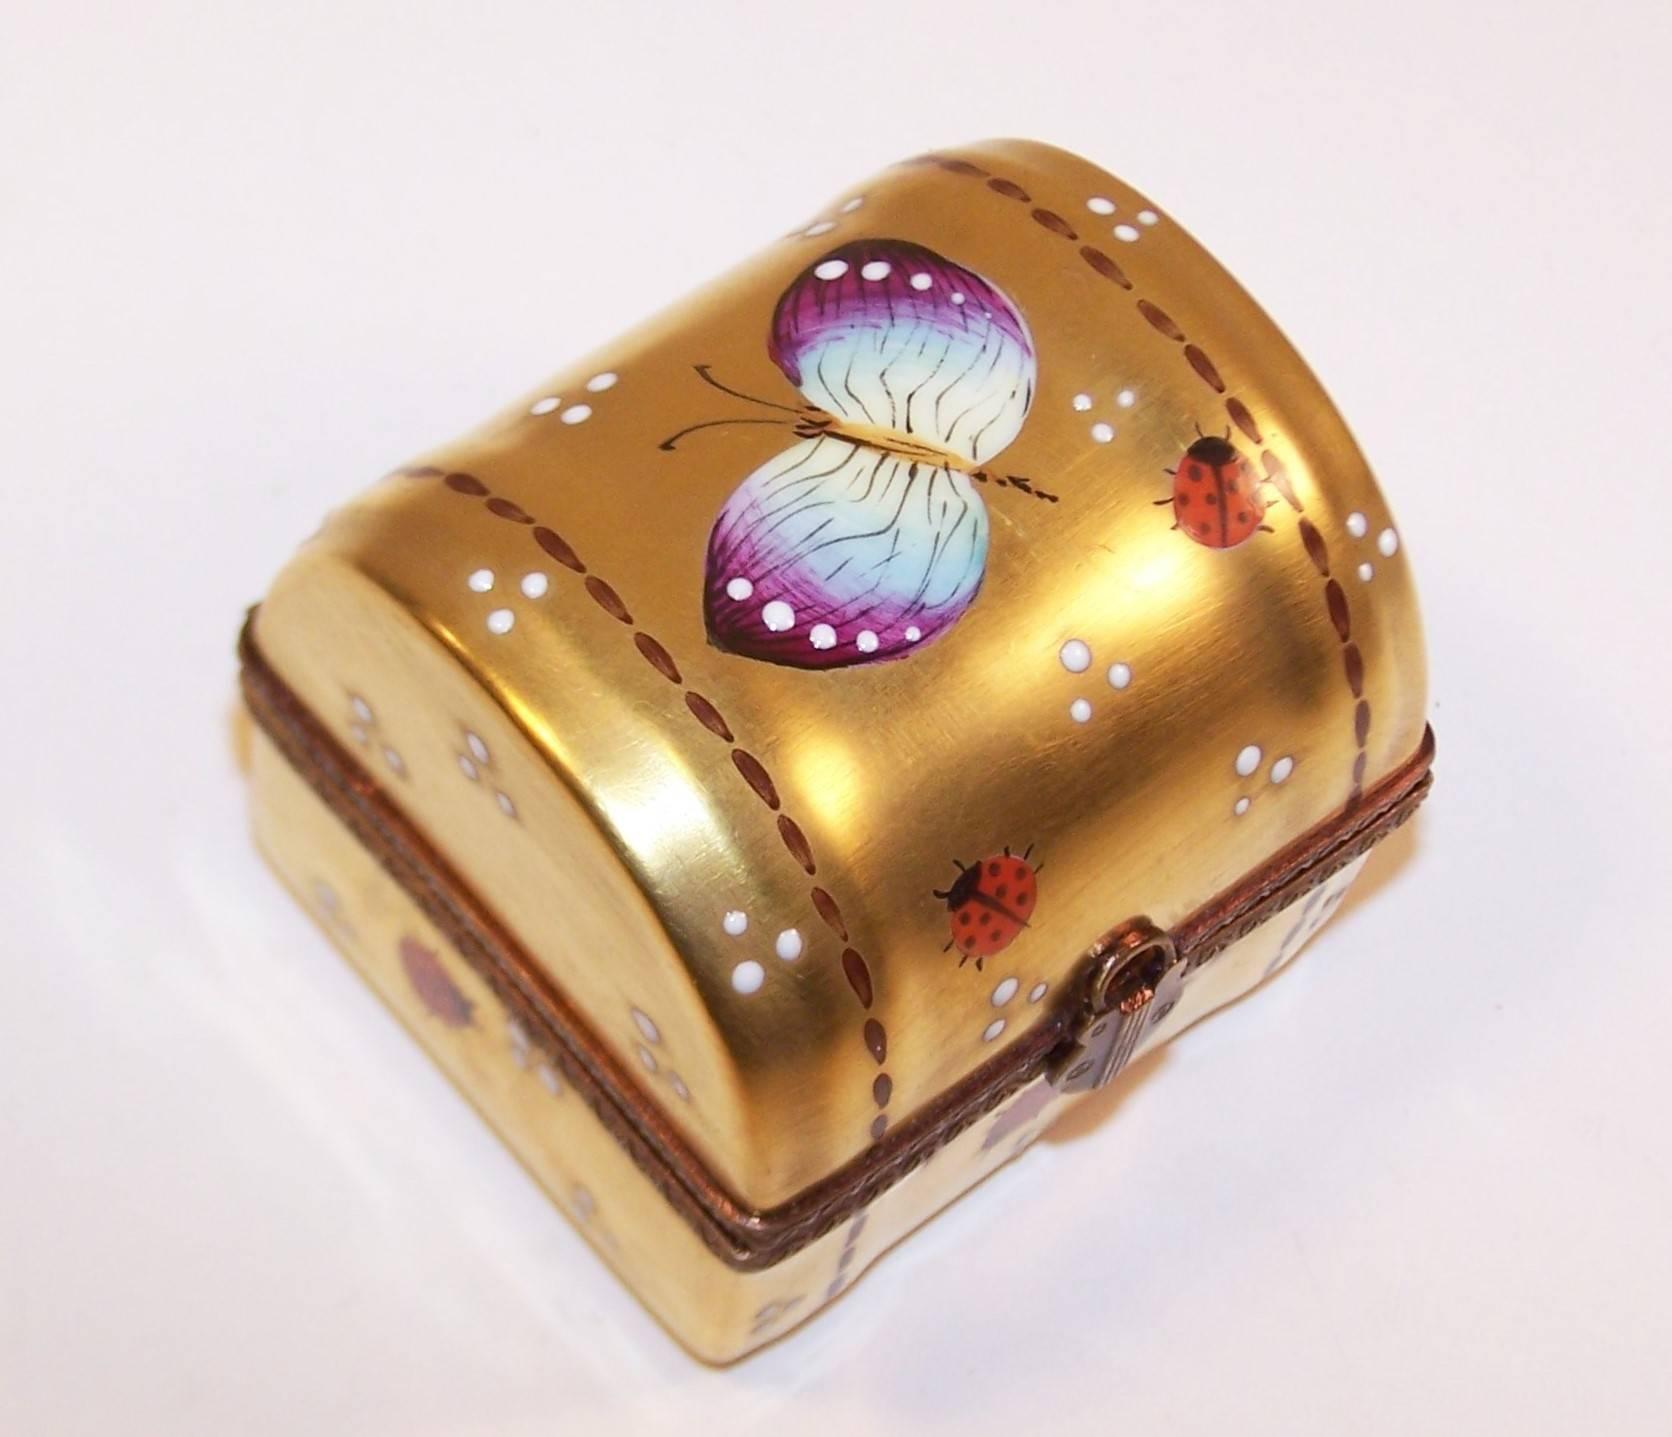 Charming Vintage Limoges Porcelain Trinket Box With Butterflies 2